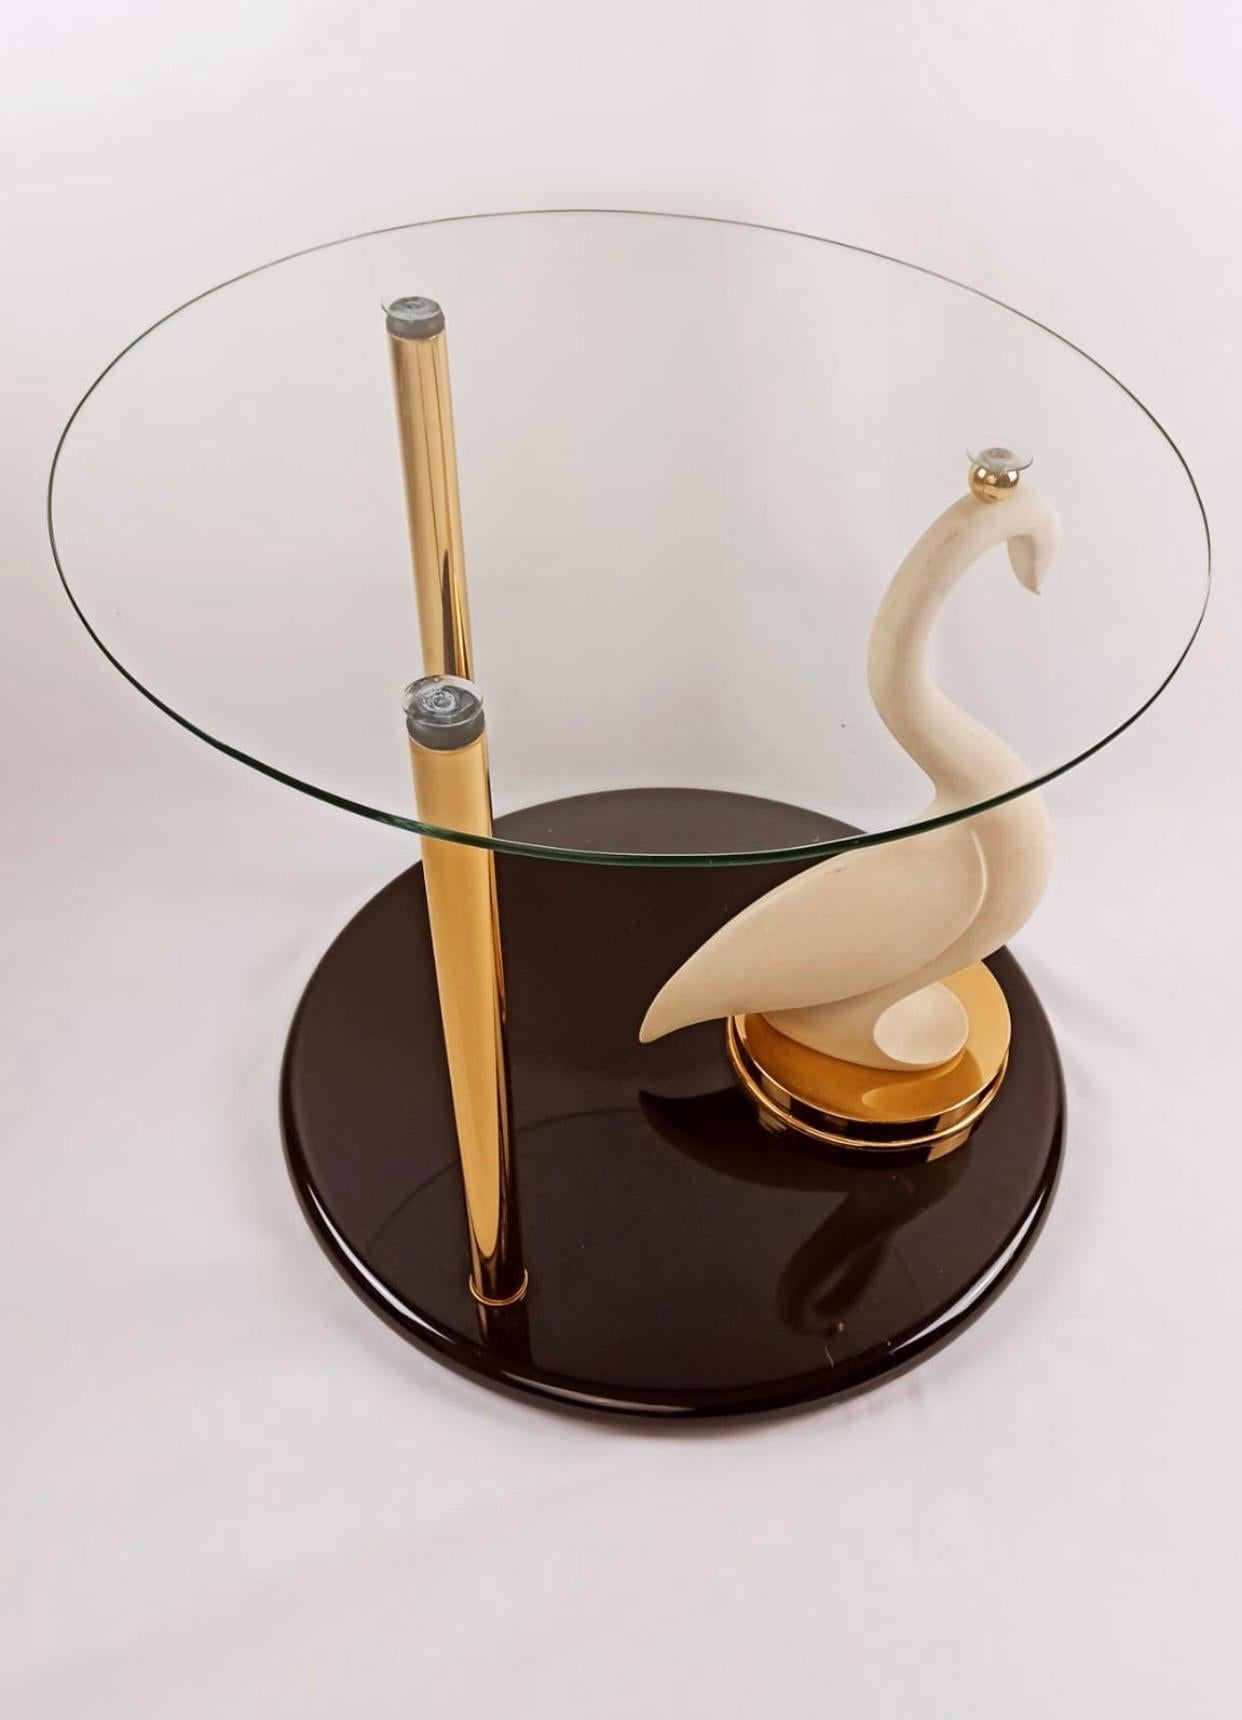 This lovely table is composed of a composite swan in ivory colour placed on a lacquered base. The head of the swan and two brass rods hold the glass top. At the base of the swan is signed 